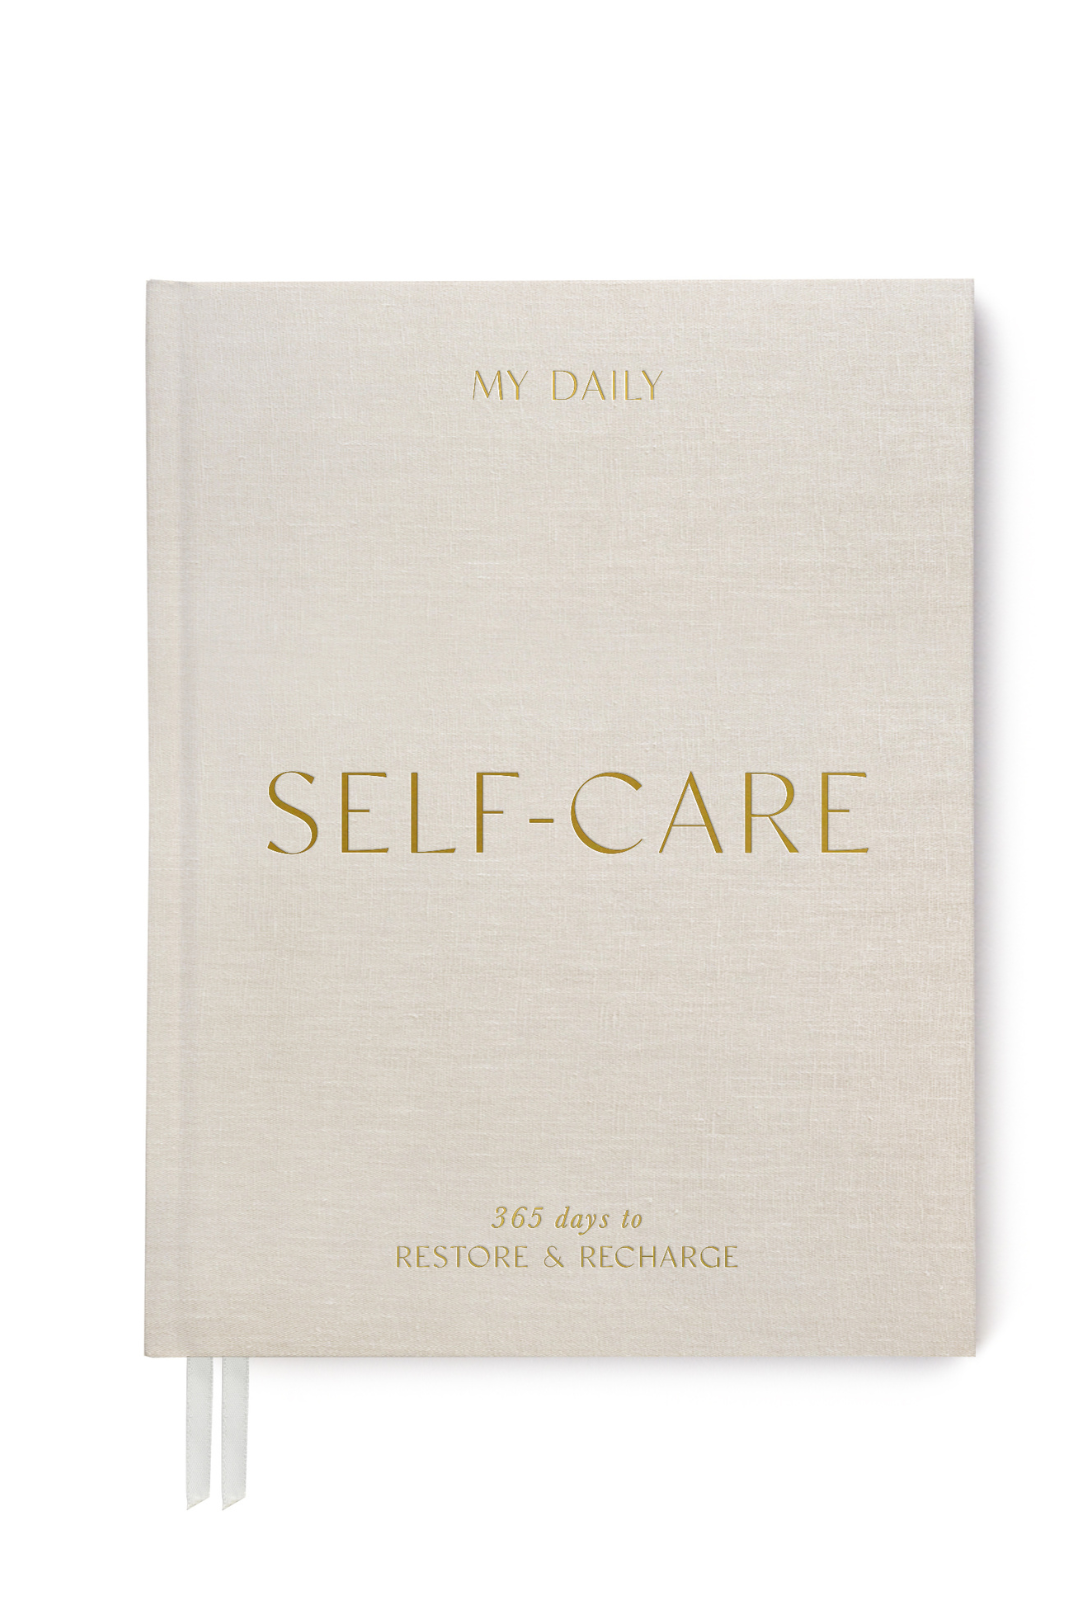 Self-care reflection journal featuring prompts for daily reflection and self-awareness, helping you nurture well-being and personal growth. This journal is sold at Blackbird Designs and made by Blush and Gold Journals.